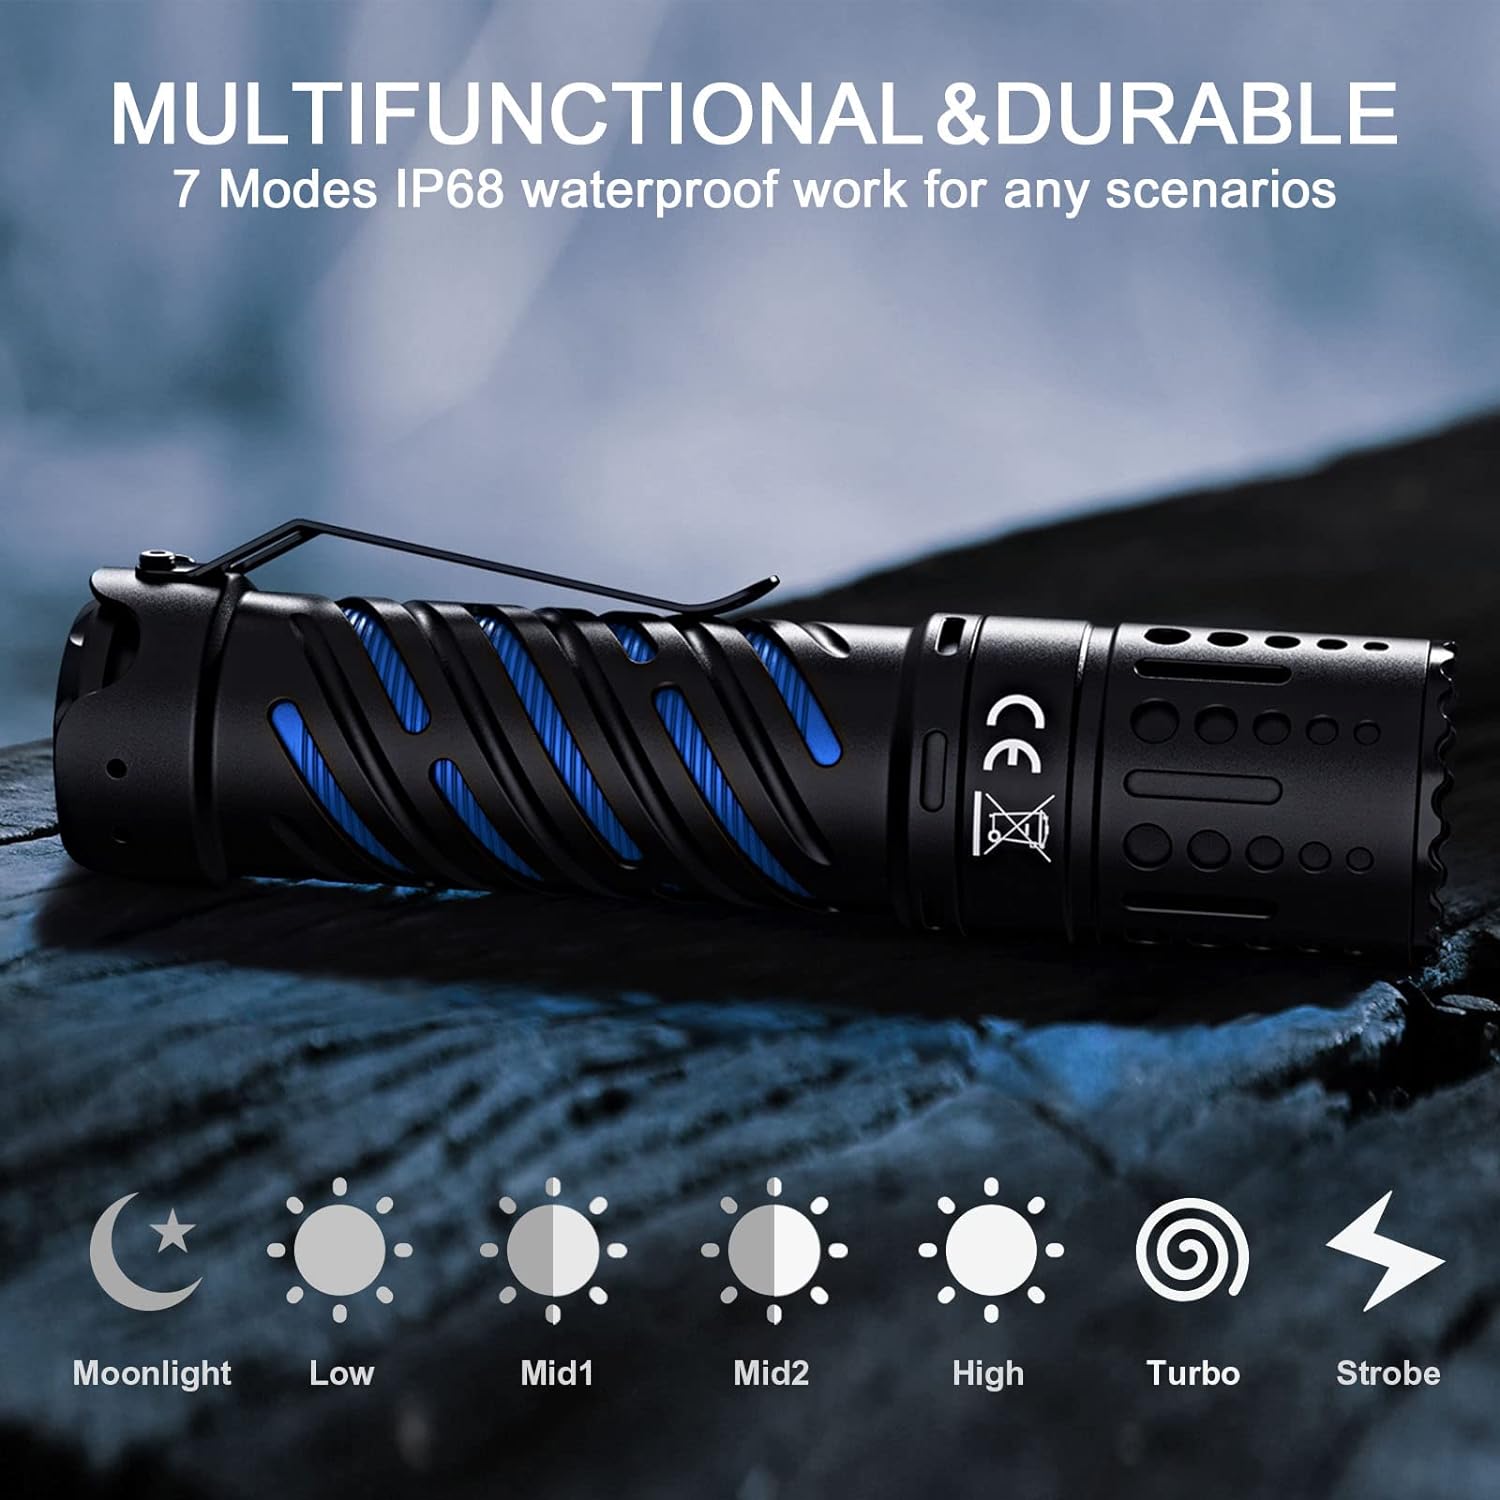 ACEBEAM E70 EDC Flashlight Rechargeable, 4600 High Lumens Pocket Flashlight, 240 Meters Beam Distance LED Flashlight Super Bright Flashlight for Outdoor Camping, Hiking and Every Days Use